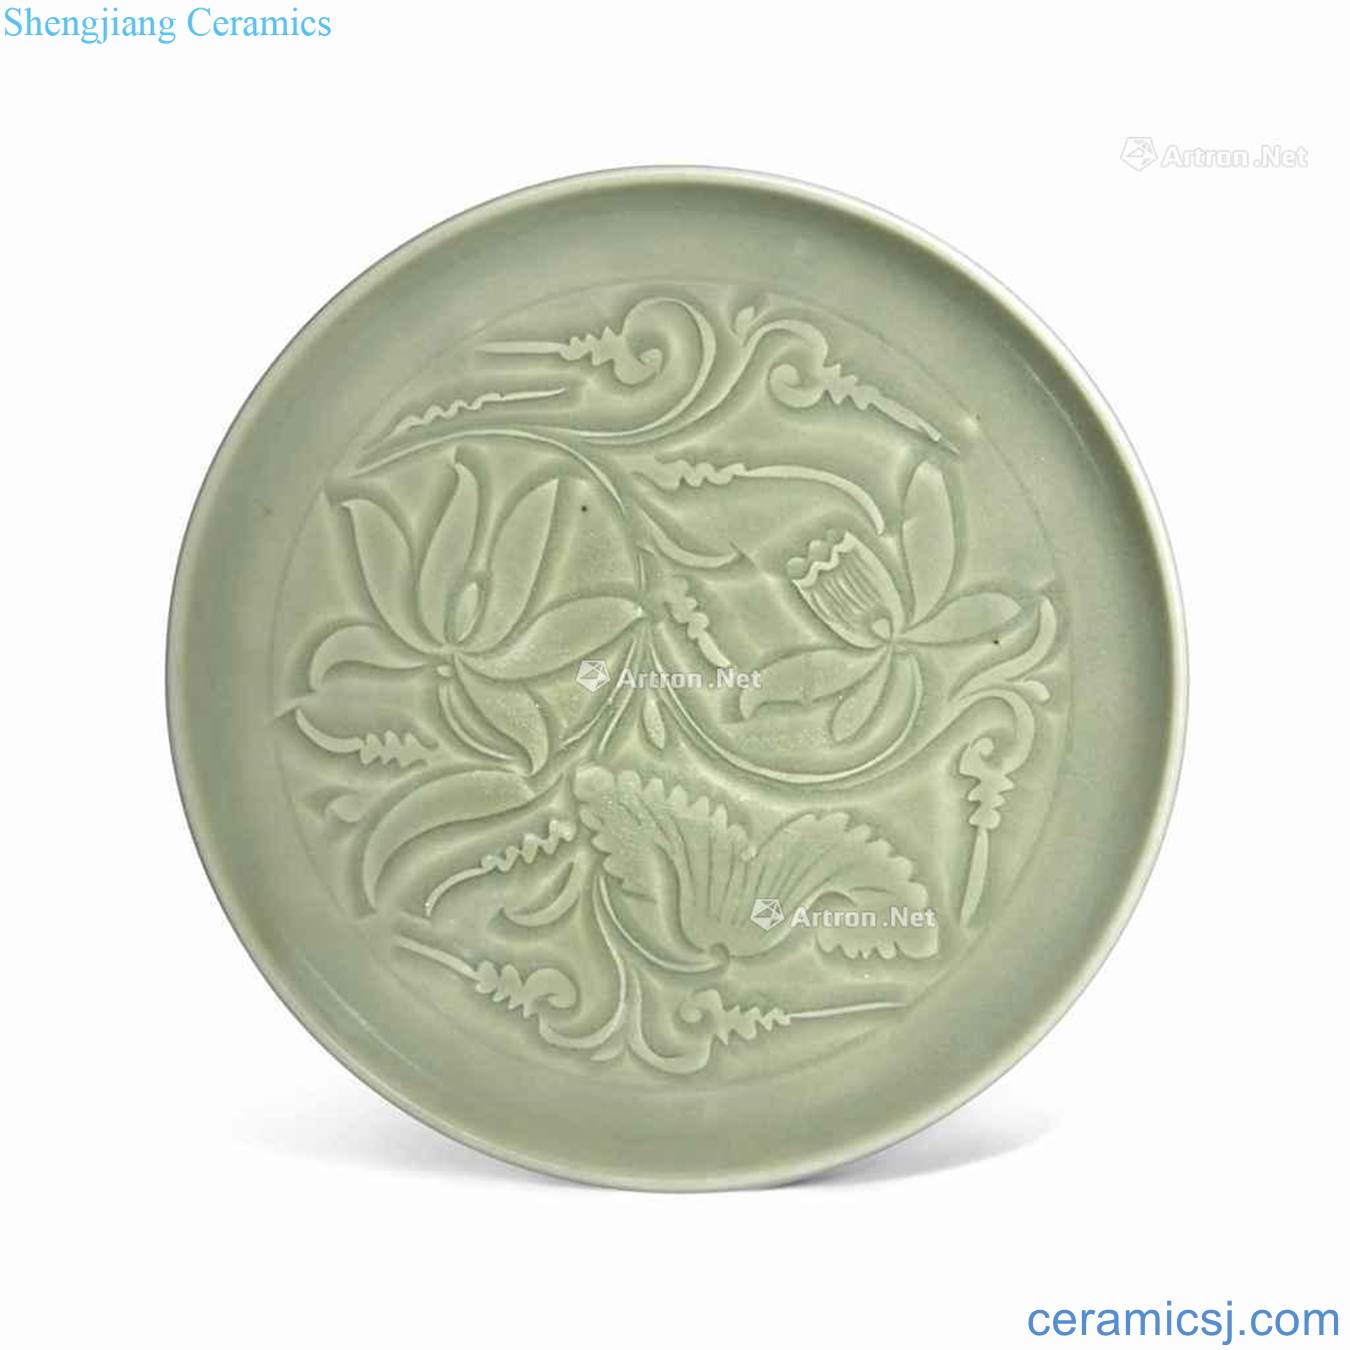 Song dynasty or even later Yao state lotus pattern bowl